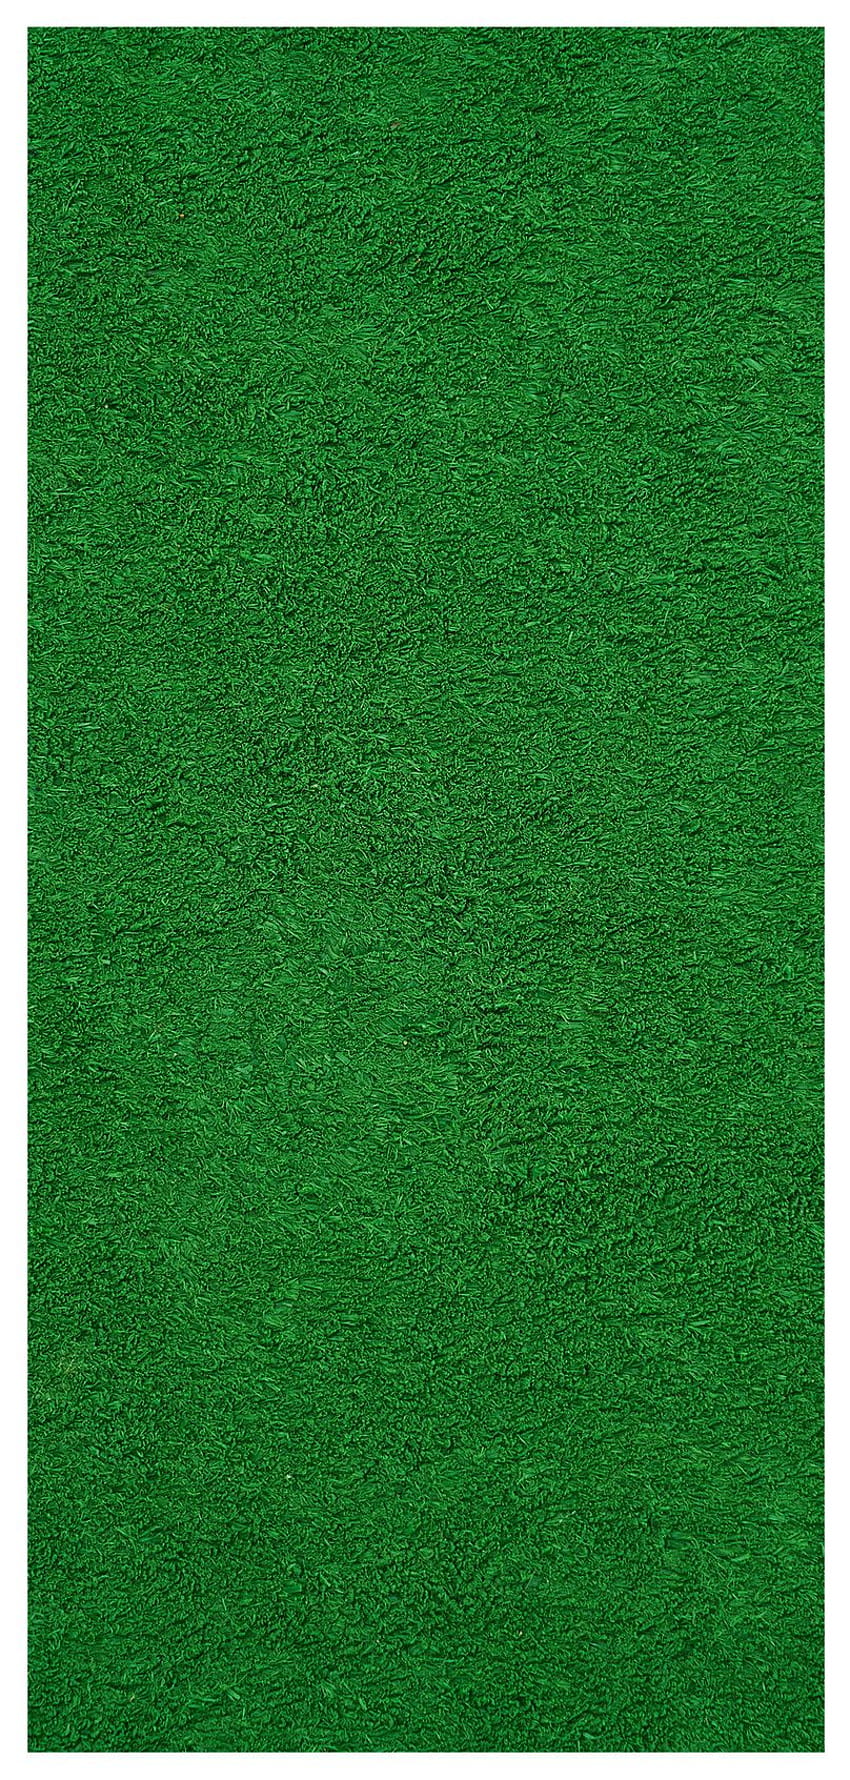 green lawn backgrounds mobile phone backgrounds, grass mobile HD phone wallpaper